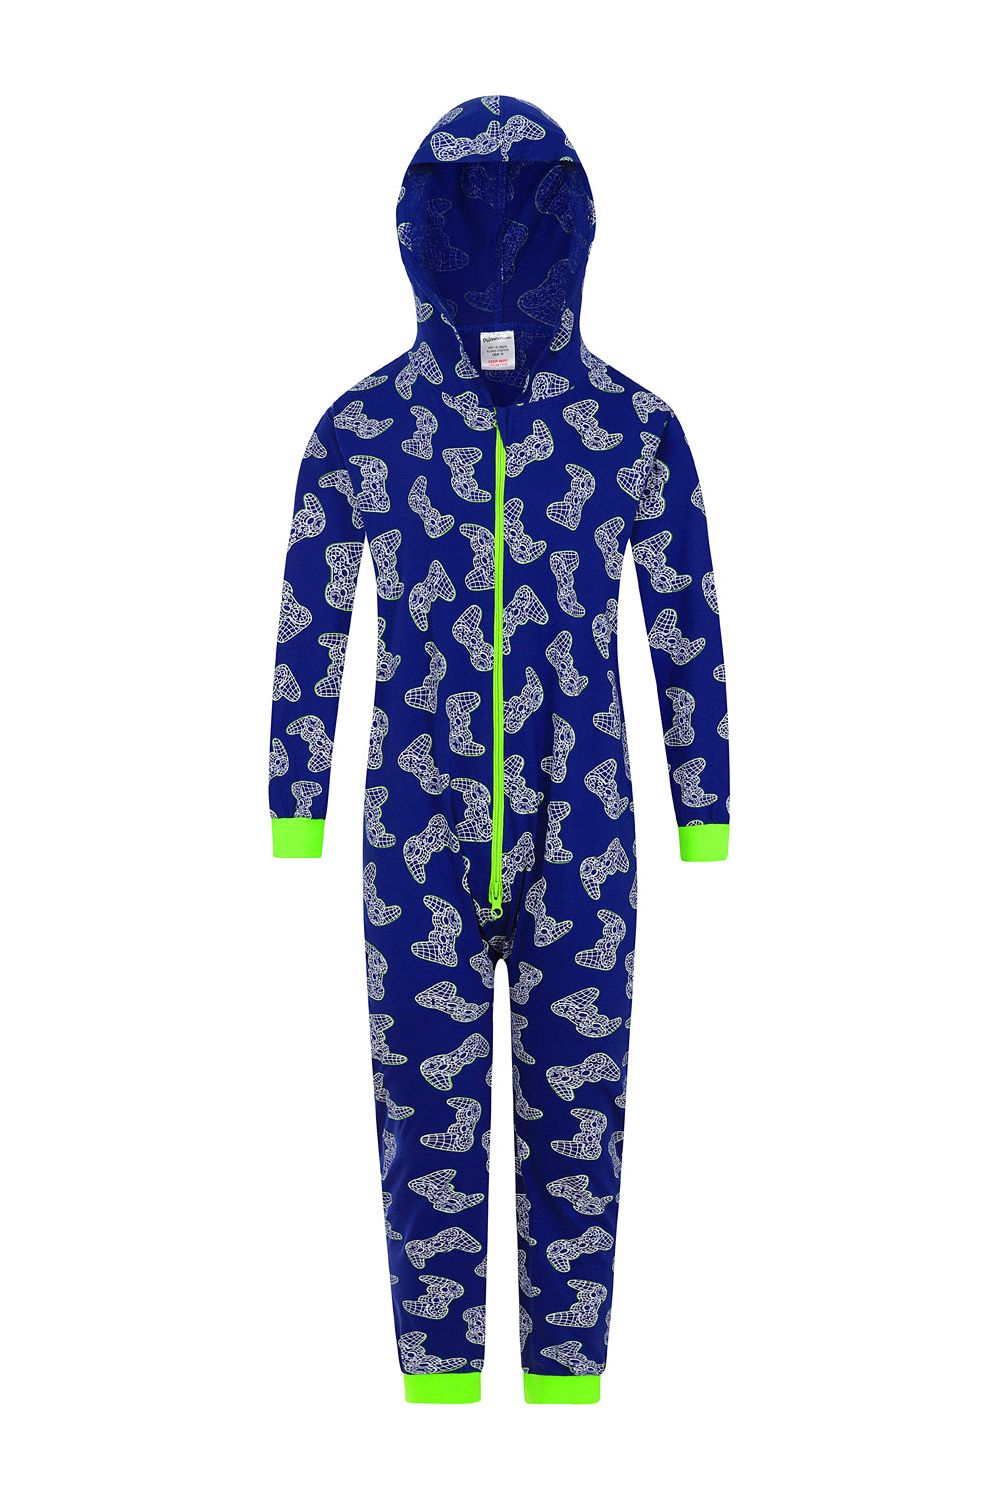 Boys Game Controller Blue Green Sleepsuit Gamer All In One Cotton - Pyjamas.com